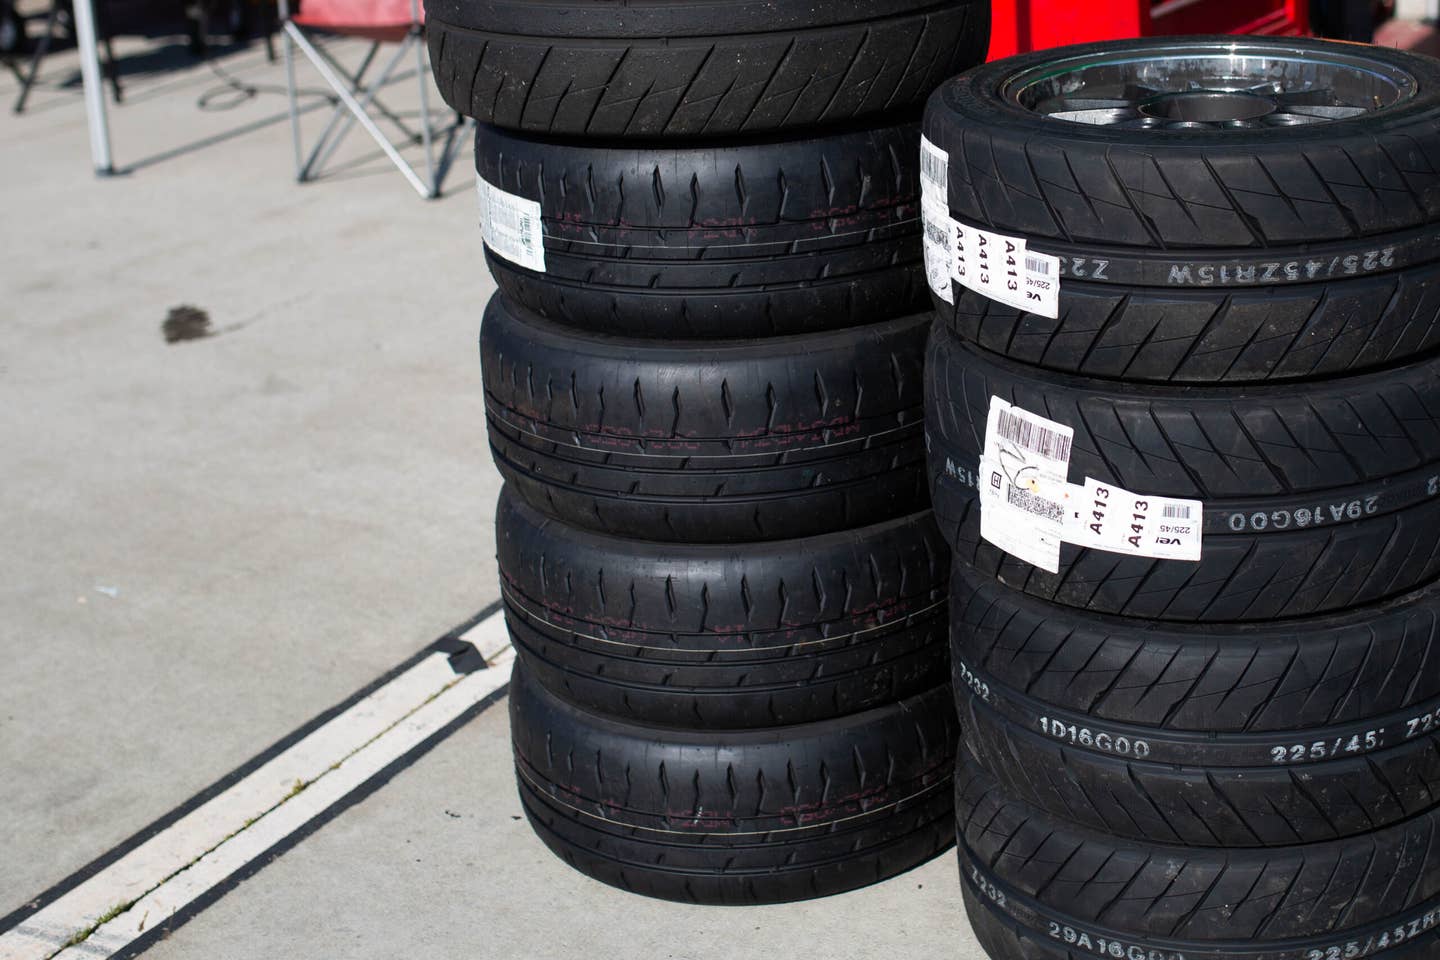 A fresh set of RE-71RS for race day, pictured to the left of the Hankook RS-4. <em>Chris Rosales</em>